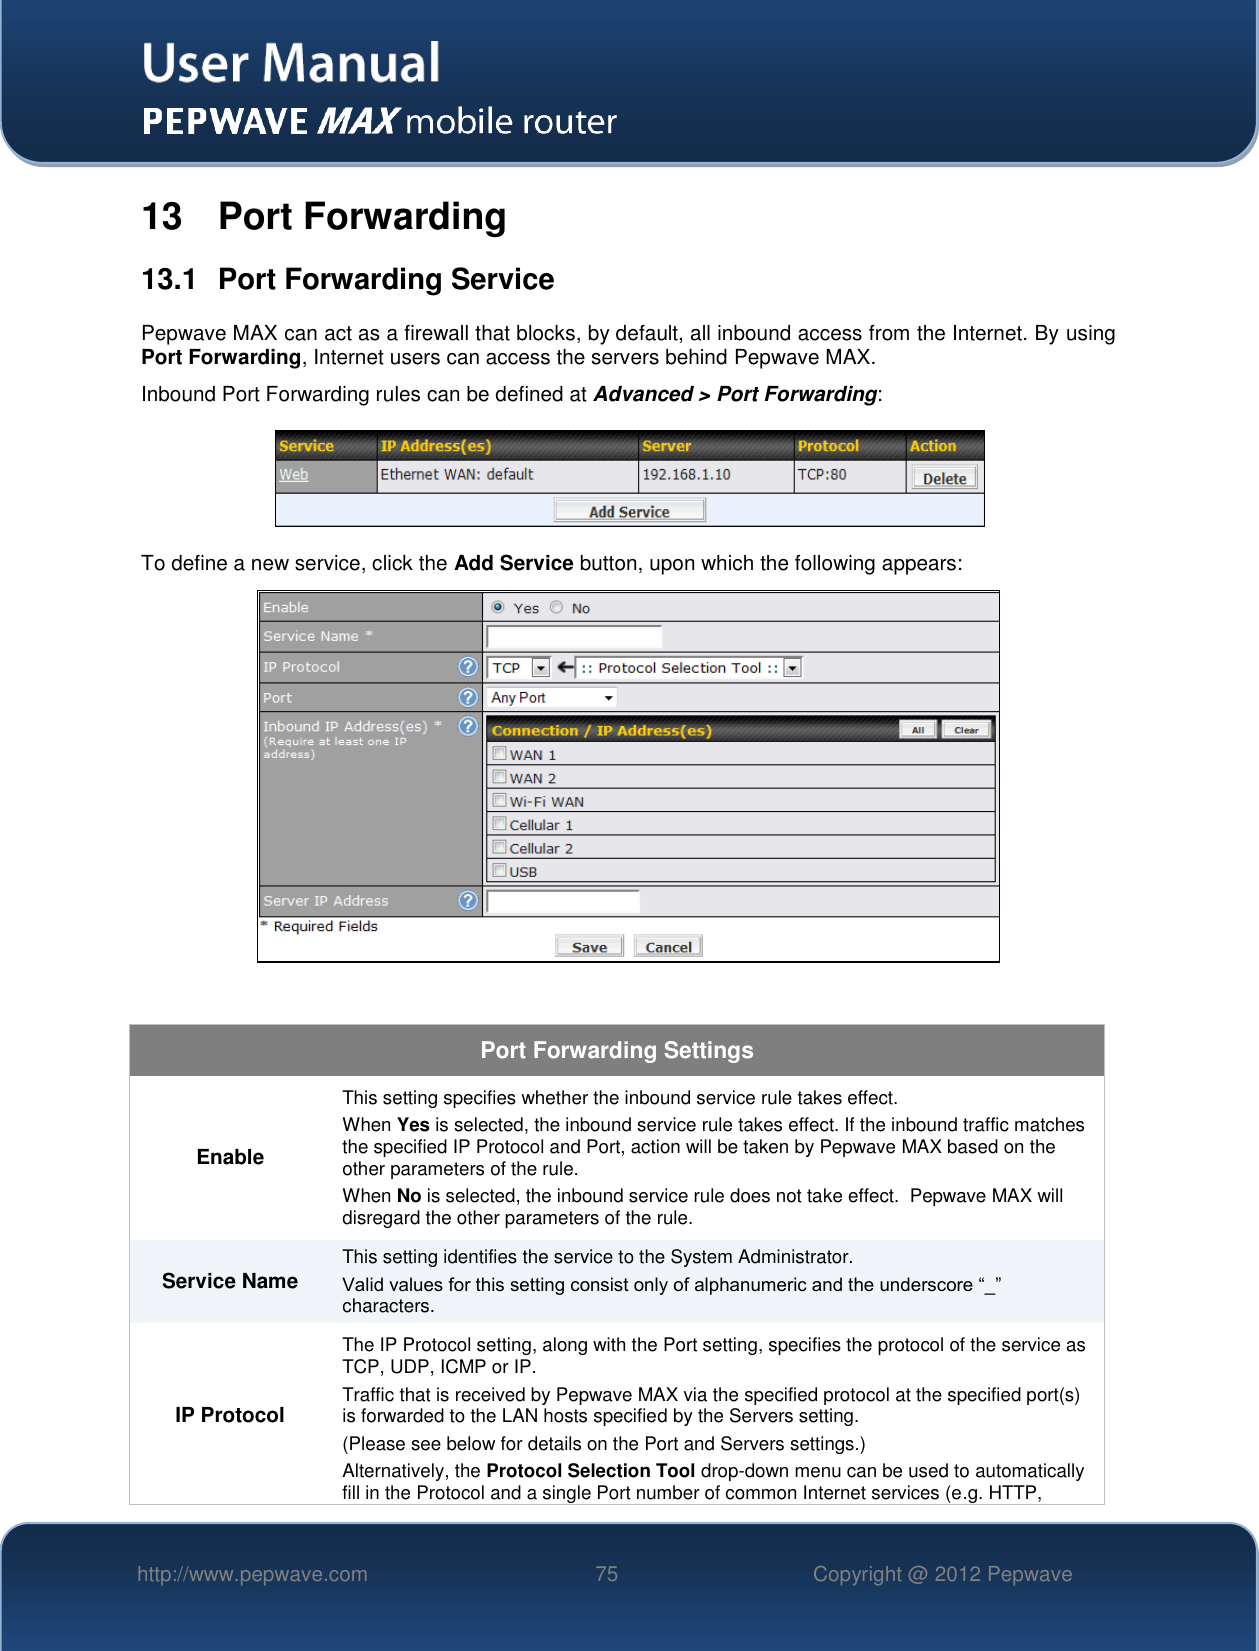   http://www.pepwave.com 75 Copyright @ 2012 Pepwave   13  Port Forwarding 13.1  Port Forwarding Service Pepwave MAX can act as a firewall that blocks, by default, all inbound access from the Internet. By using Port Forwarding, Internet users can access the servers behind Pepwave MAX. Inbound Port Forwarding rules can be defined at Advanced &gt; Port Forwarding:  To define a new service, click the Add Service button, upon which the following appears:    Port Forwarding Settings Enable This setting specifies whether the inbound service rule takes effect. When Yes is selected, the inbound service rule takes effect. If the inbound traffic matches the specified IP Protocol and Port, action will be taken by Pepwave MAX based on the other parameters of the rule. When No is selected, the inbound service rule does not take effect.  Pepwave MAX will disregard the other parameters of the rule. Service Name This setting identifies the service to the System Administrator. Valid values for this setting consist only of alphanumeric and the underscore “_” characters. IP Protocol The IP Protocol setting, along with the Port setting, specifies the protocol of the service as TCP, UDP, ICMP or IP. Traffic that is received by Pepwave MAX via the specified protocol at the specified port(s) is forwarded to the LAN hosts specified by the Servers setting.   (Please see below for details on the Port and Servers settings.) Alternatively, the Protocol Selection Tool drop-down menu can be used to automatically fill in the Protocol and a single Port number of common Internet services (e.g. HTTP, 